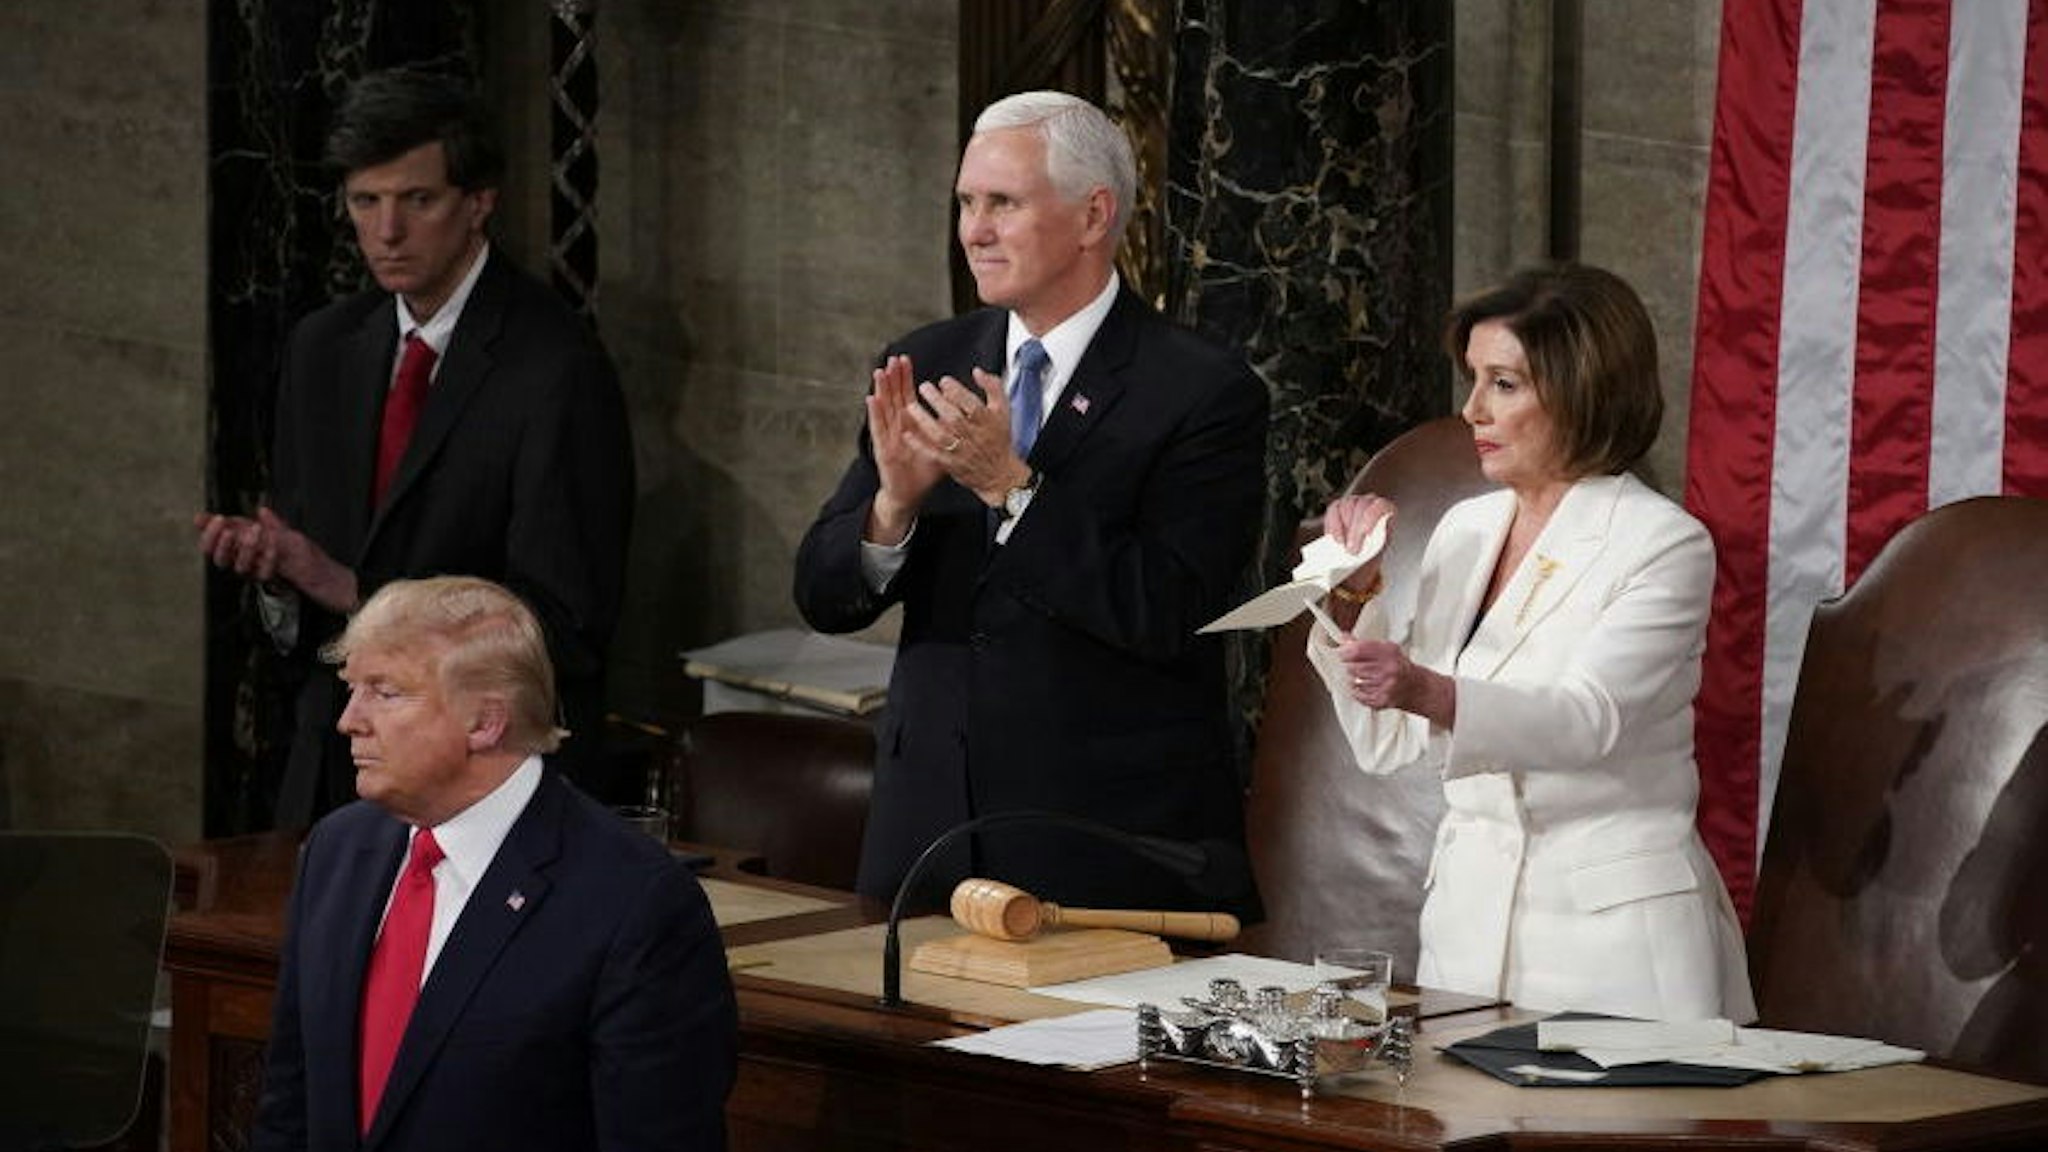 Speaker of the House Nancy Pelosi, a Democrat from California, right, rips up papers after U.S. President Donald Trump, bottom left, delivers a State of the Union address to a joint session of Congress at the U.S. Capitol in Washington, D.C., U.S., on Tuesday, Feb. 4, 2020. President Donald Trump will try to move past his impeachment and make a case for his re-election in Tuesday's State of the Union address by taking credit for a strong economy, newly signed trade deals and an immigration crackdown. Photographer: Al Drago/Bloomberg